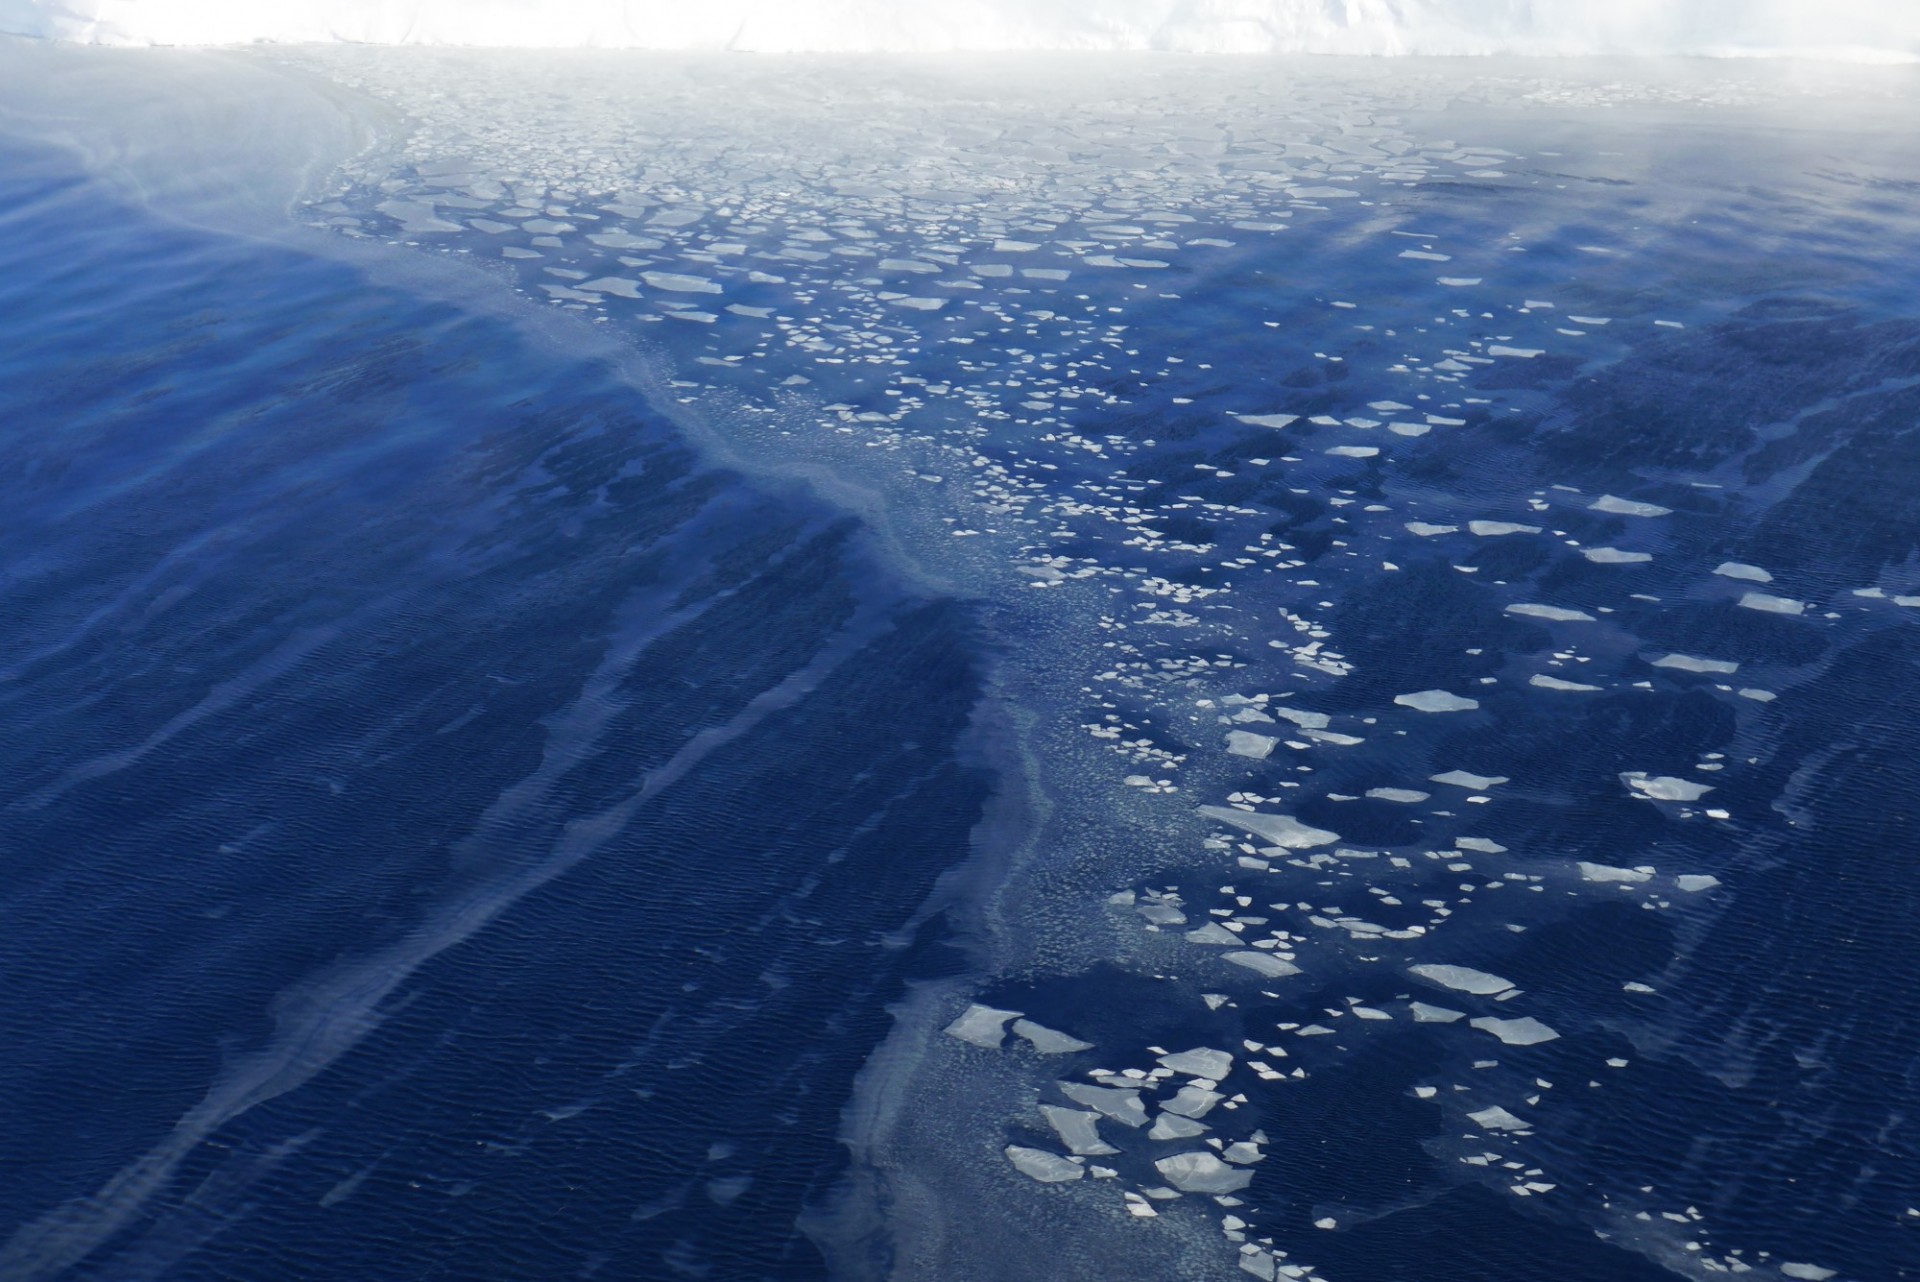 Sea ice floating on the Ross Sea at the ice shelf front. Photo: Martin Wearing